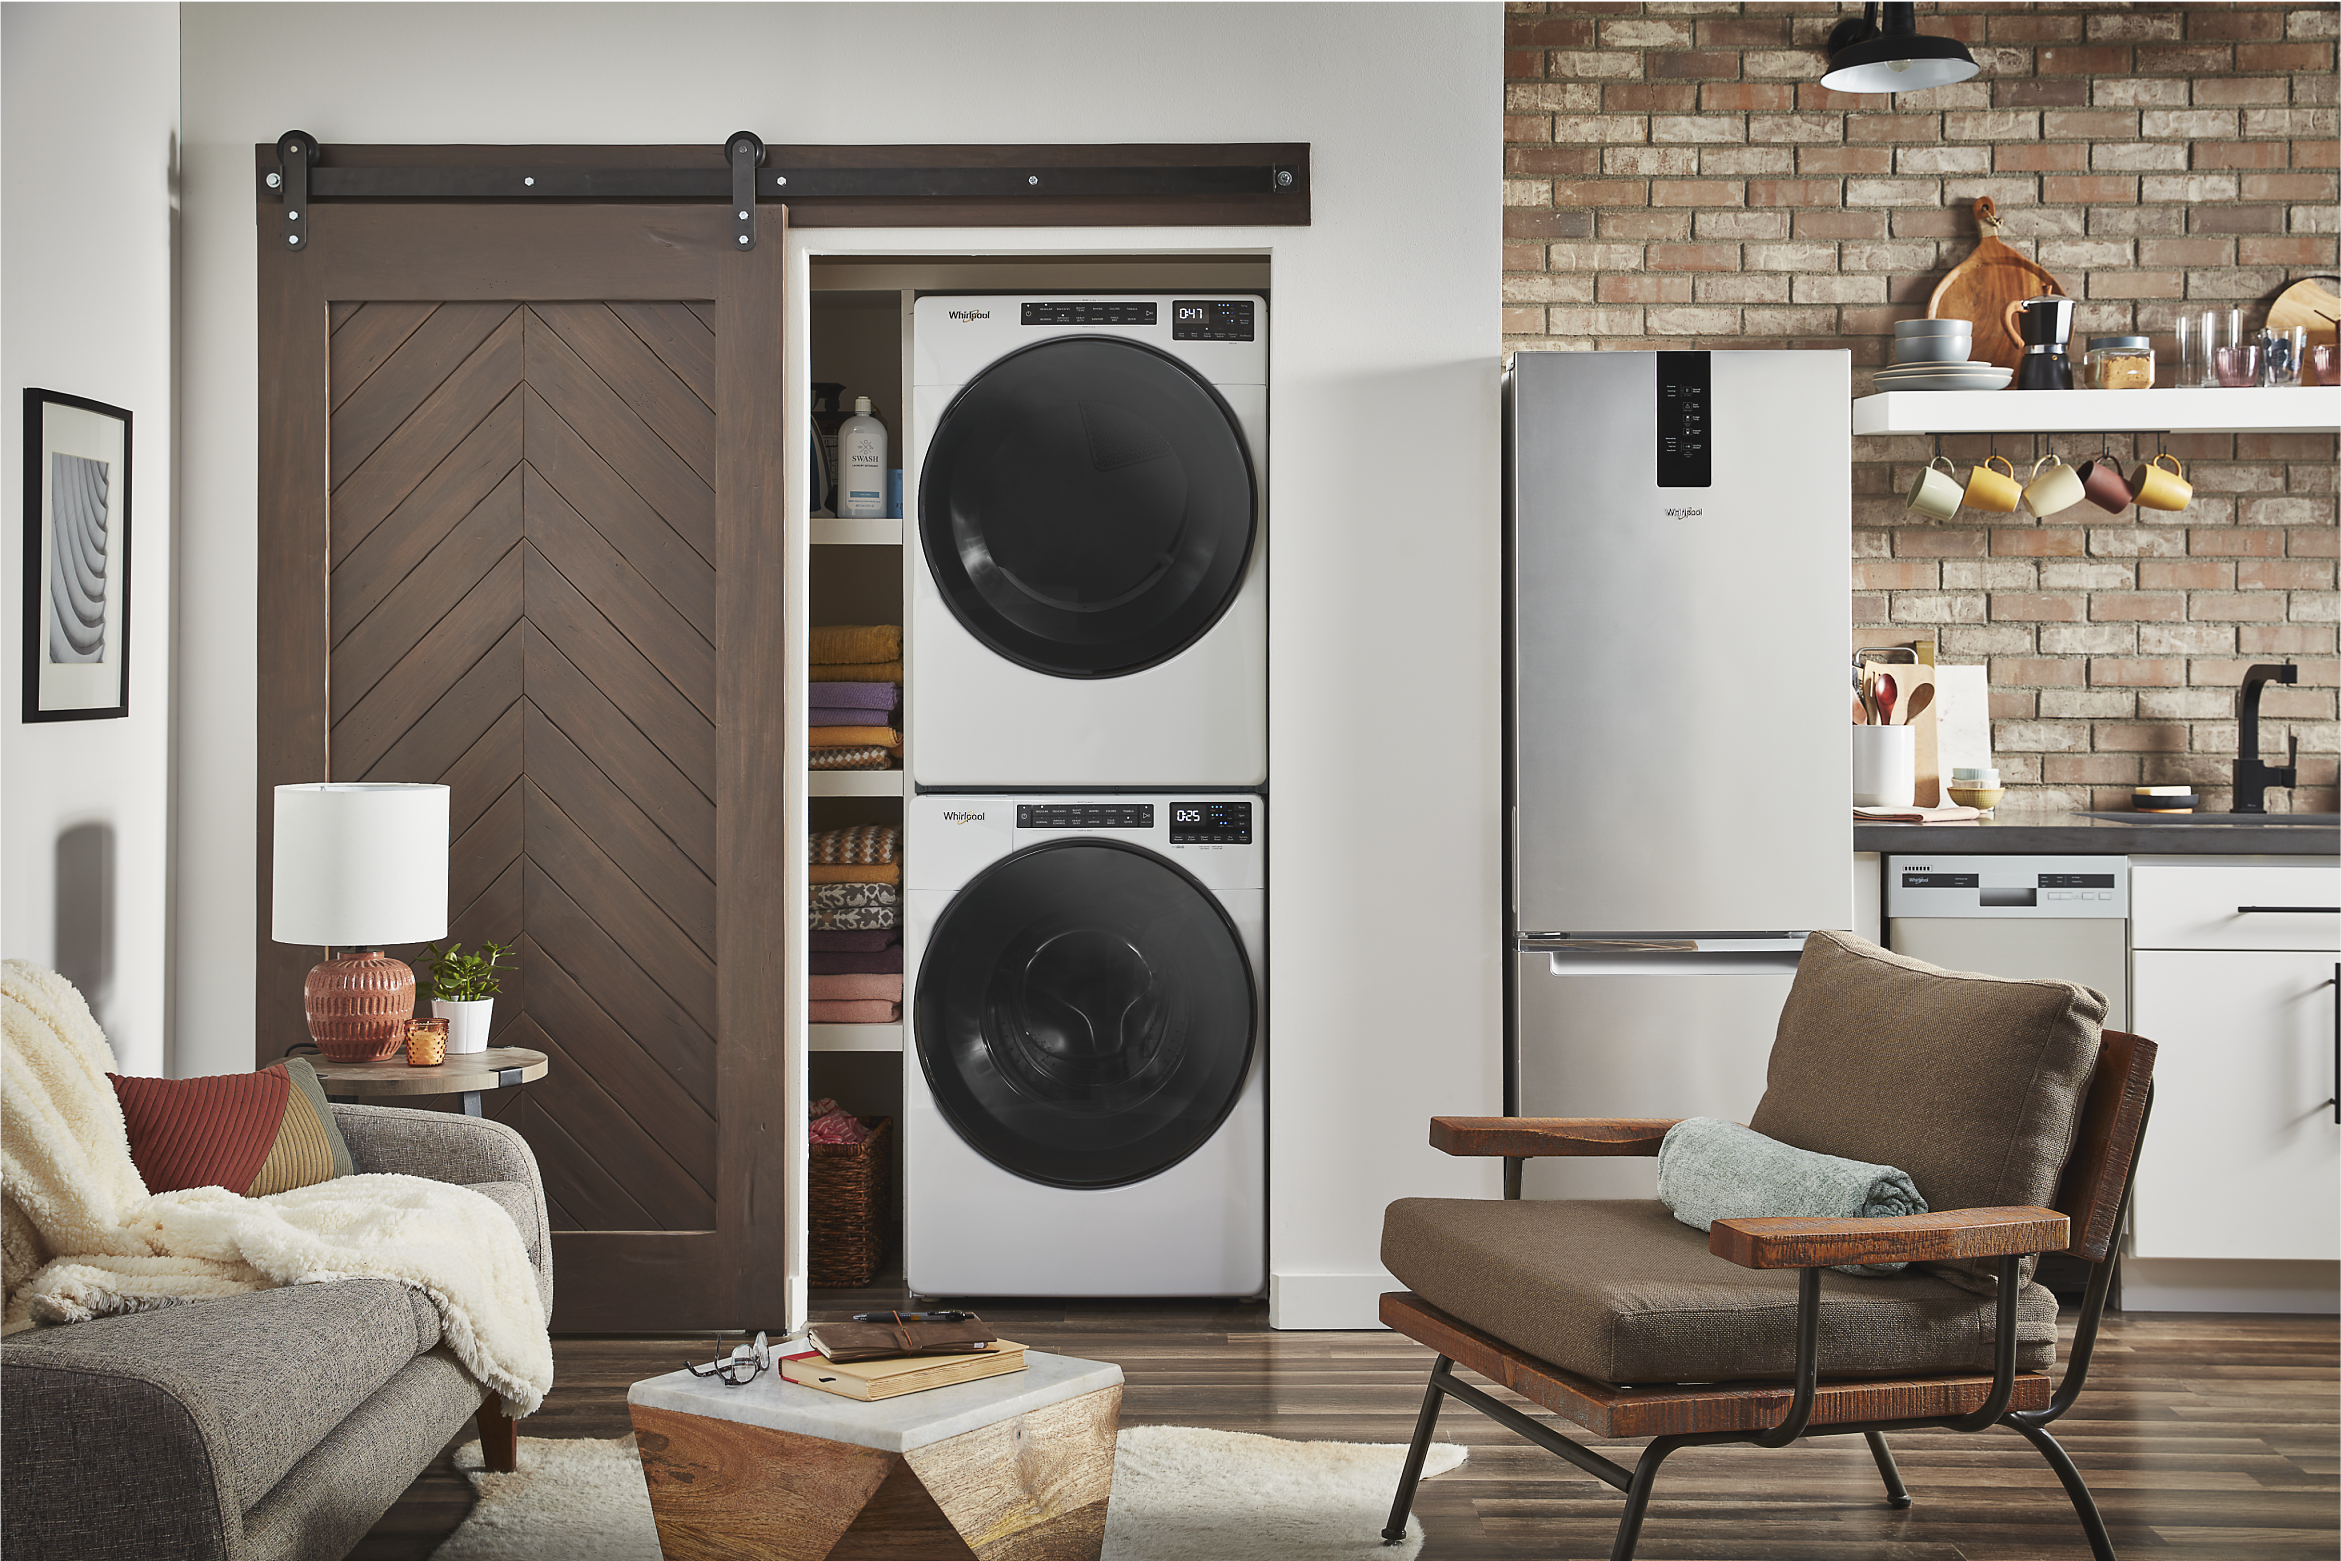 A Whirlpool® Stacked Washer & Dryer in a closet with folding doors